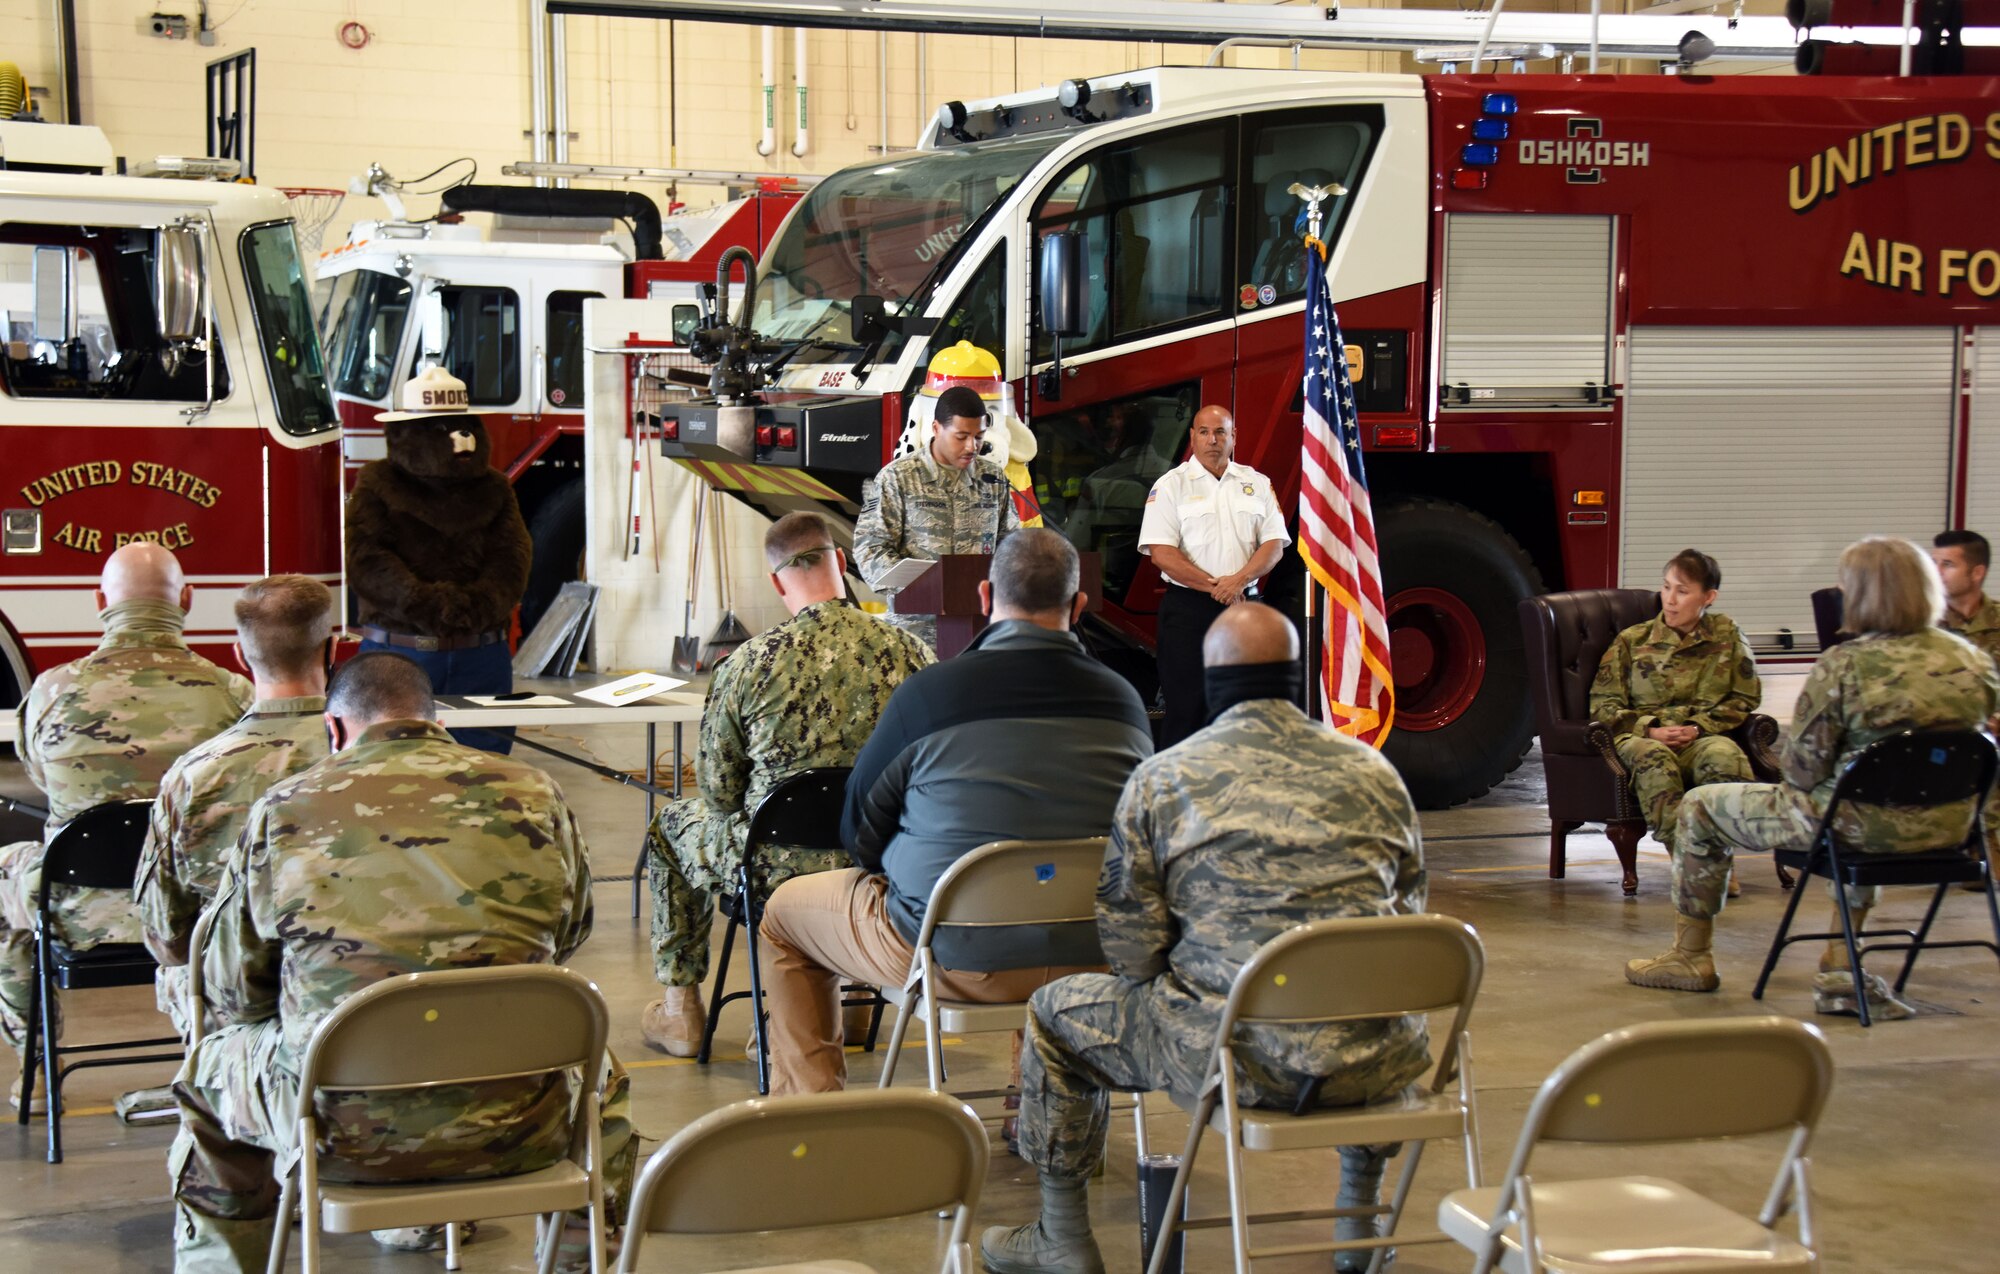 U.S. Air Force Staff Sgt. Maurice Stevenson, 87th Civil Engineering Squadron, speaks to the Joint Base McGuire-Dix-Lakehurst community about Fire Prevention Week, Oct. 5, 2020 at Joint Base MDL, N.J. Fire Prevention Week begins October 4th and runs until October 10th. The goal of Fire Prevention Week is to raise fire safety awareness around the Joint Base MDL Community.